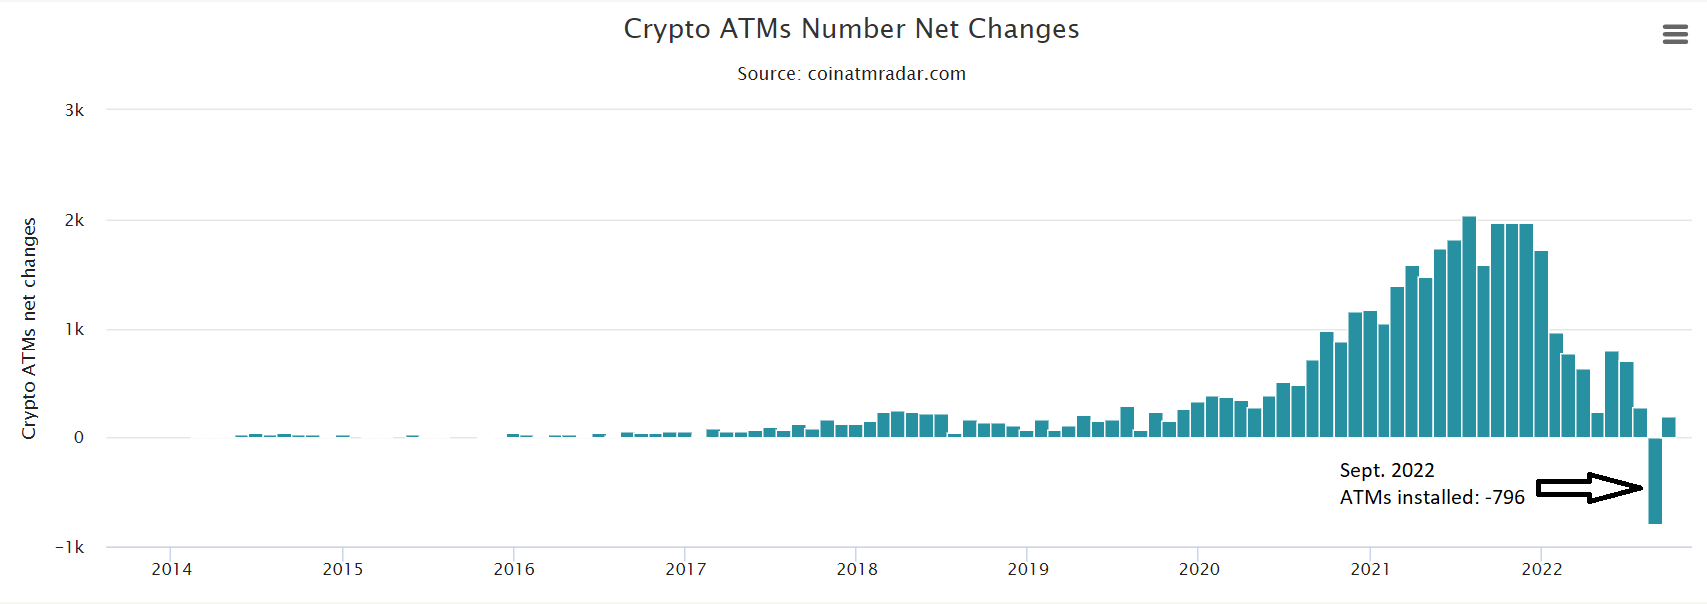 1664697942 426 Net Bitcoin ATMs growth drops globally for the first time